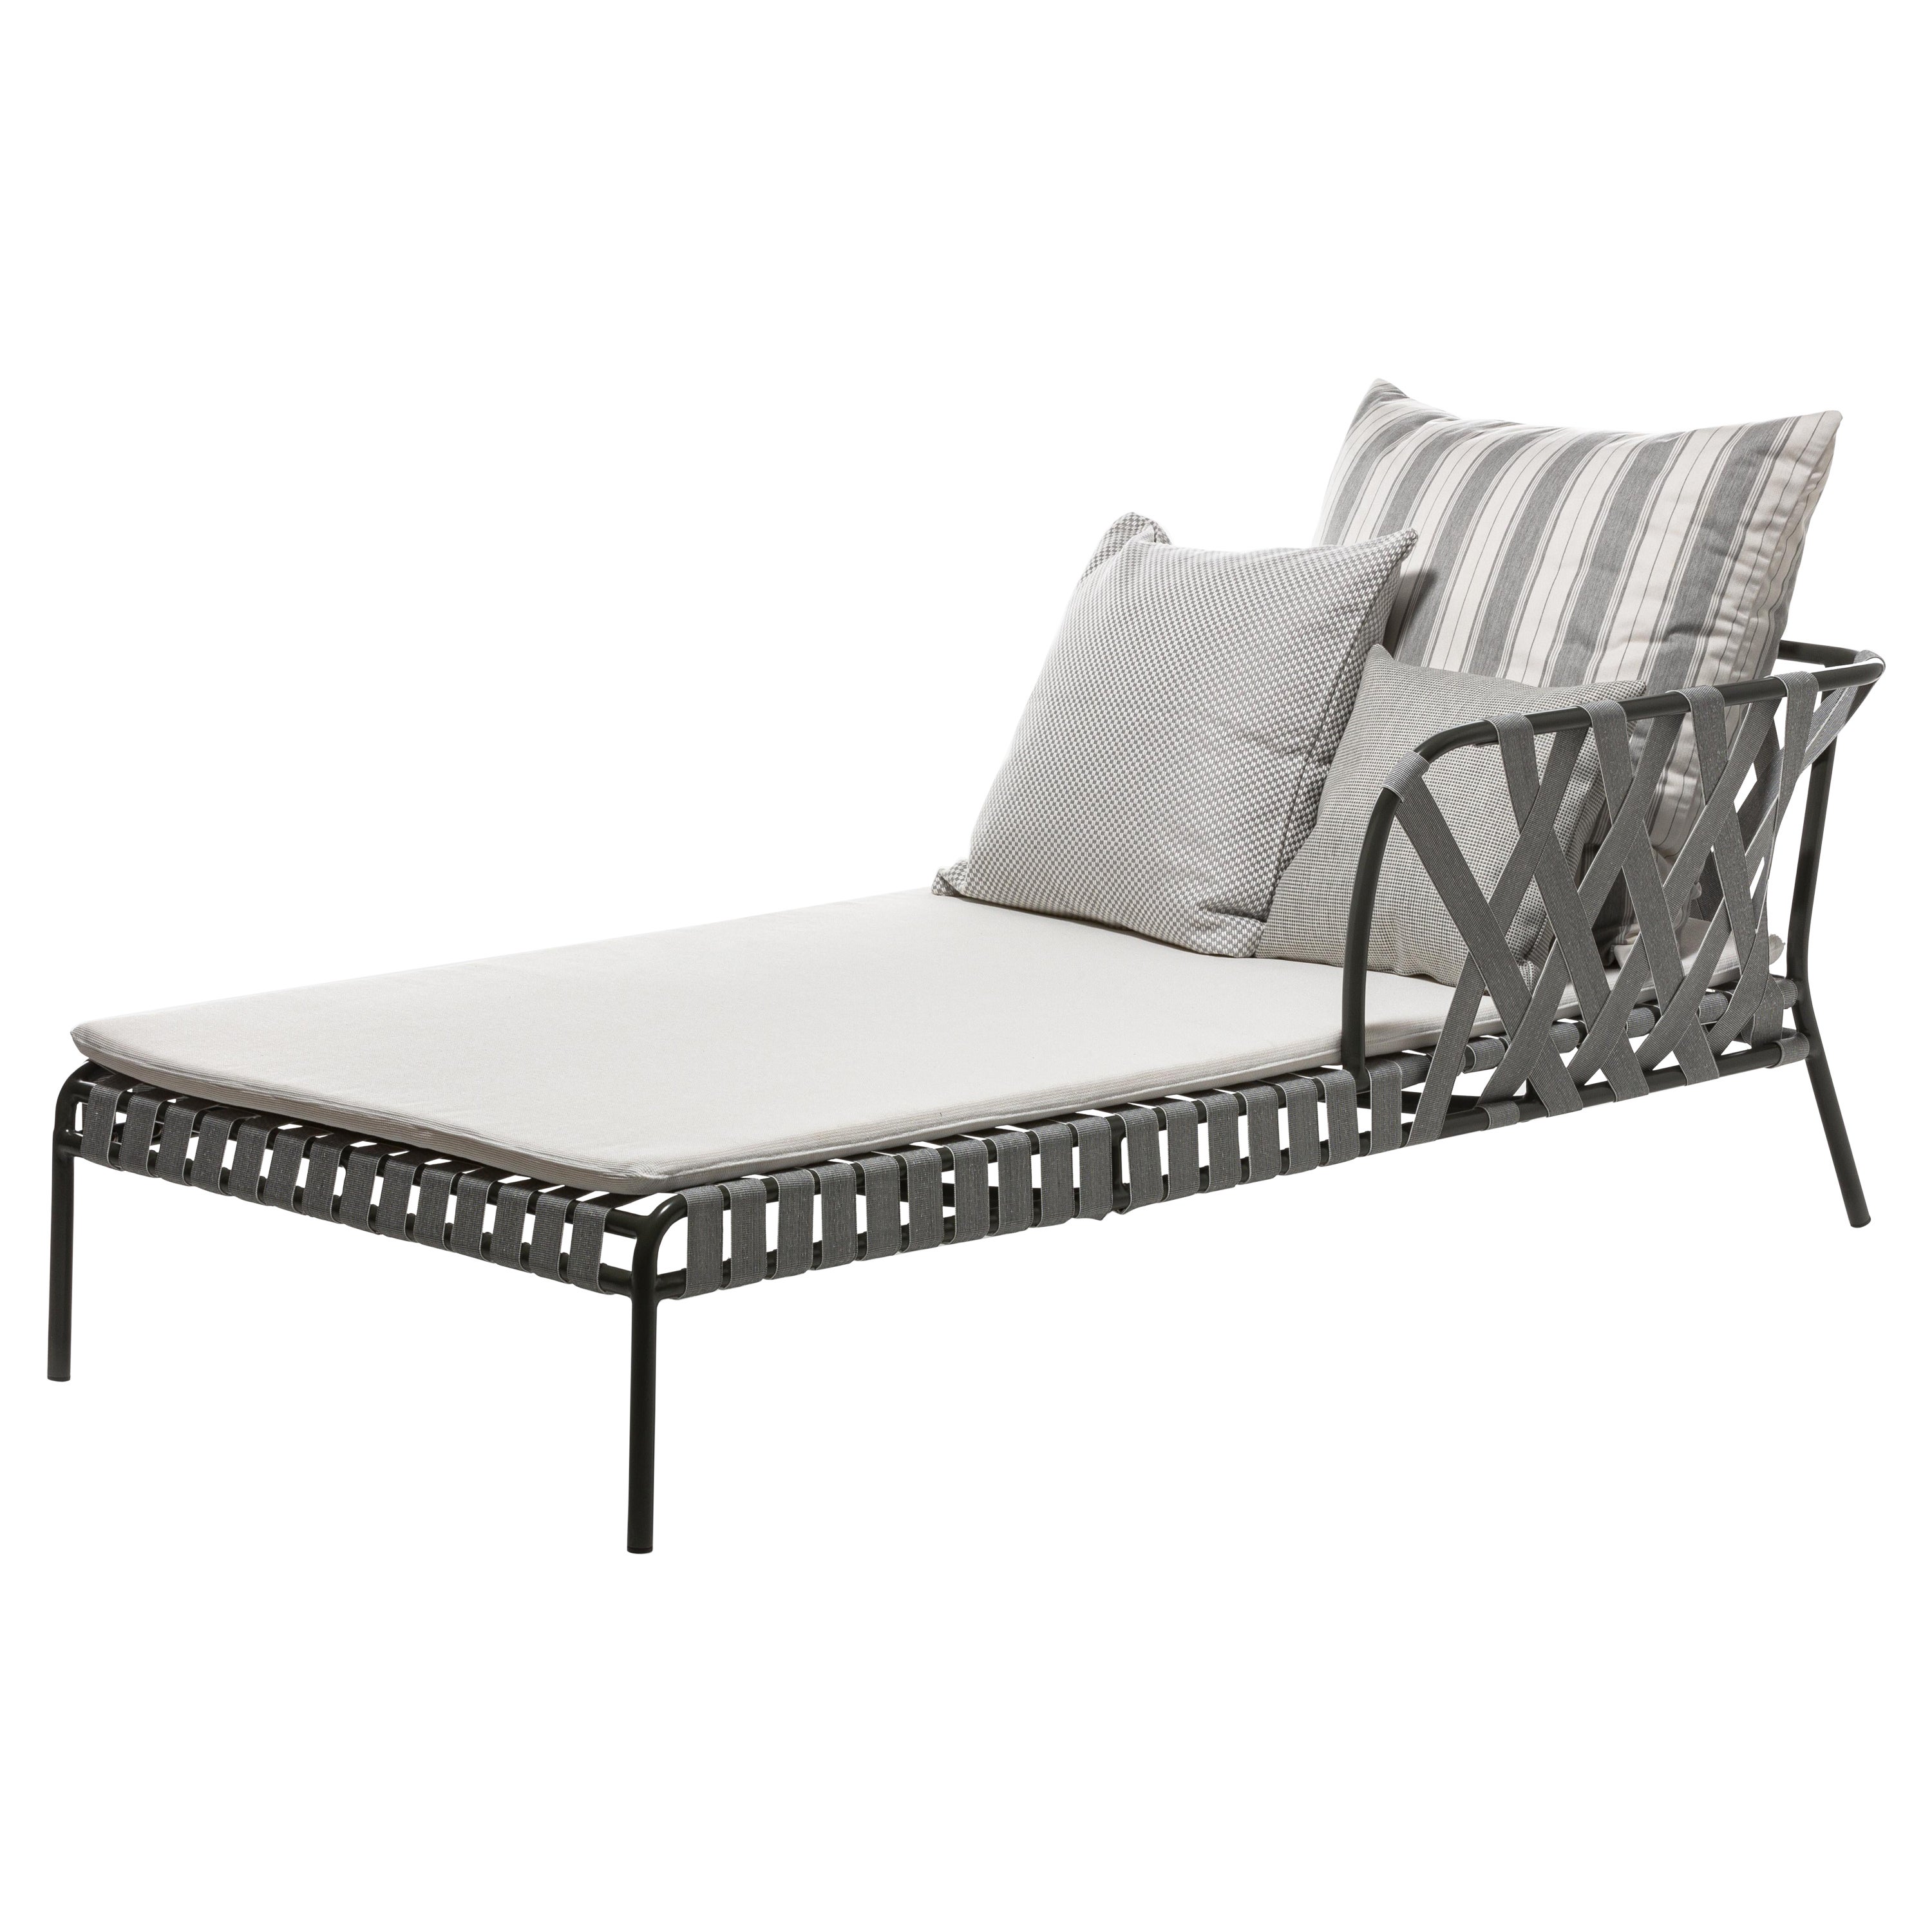 Gervasoni Inout Day Bed in Aspen 01 Upholstery with Grey Aluminium Frame